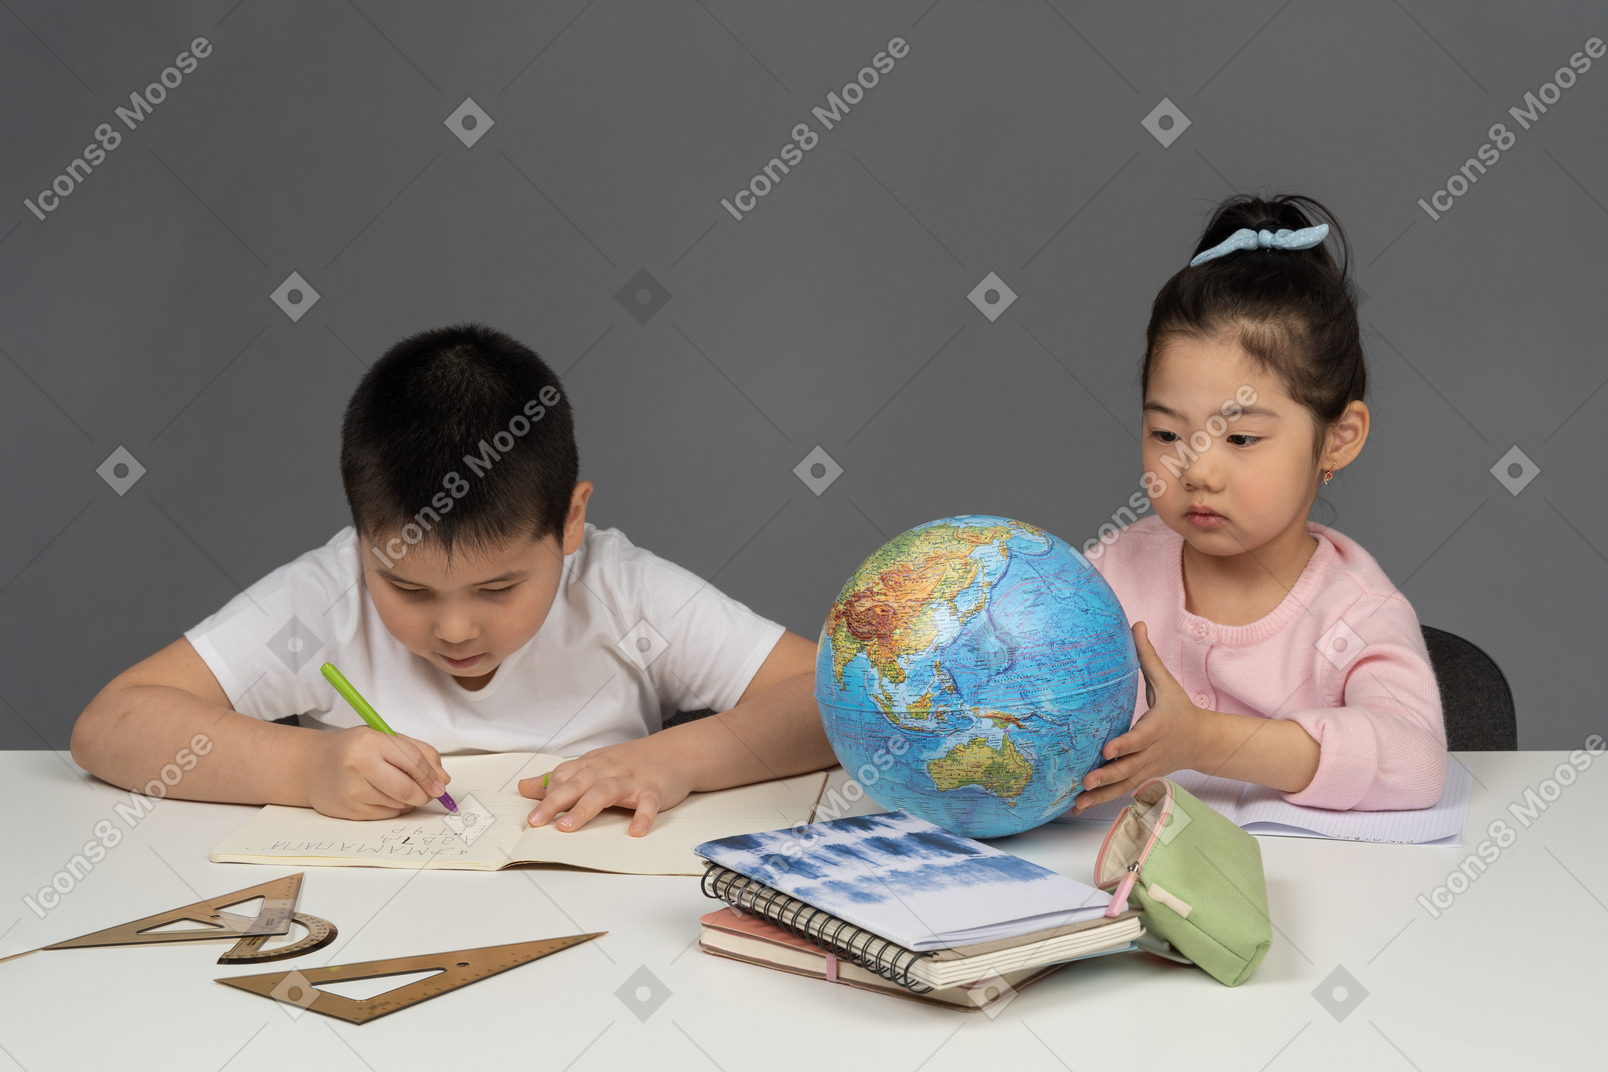 Boy doing his homework and girl looking at a globe